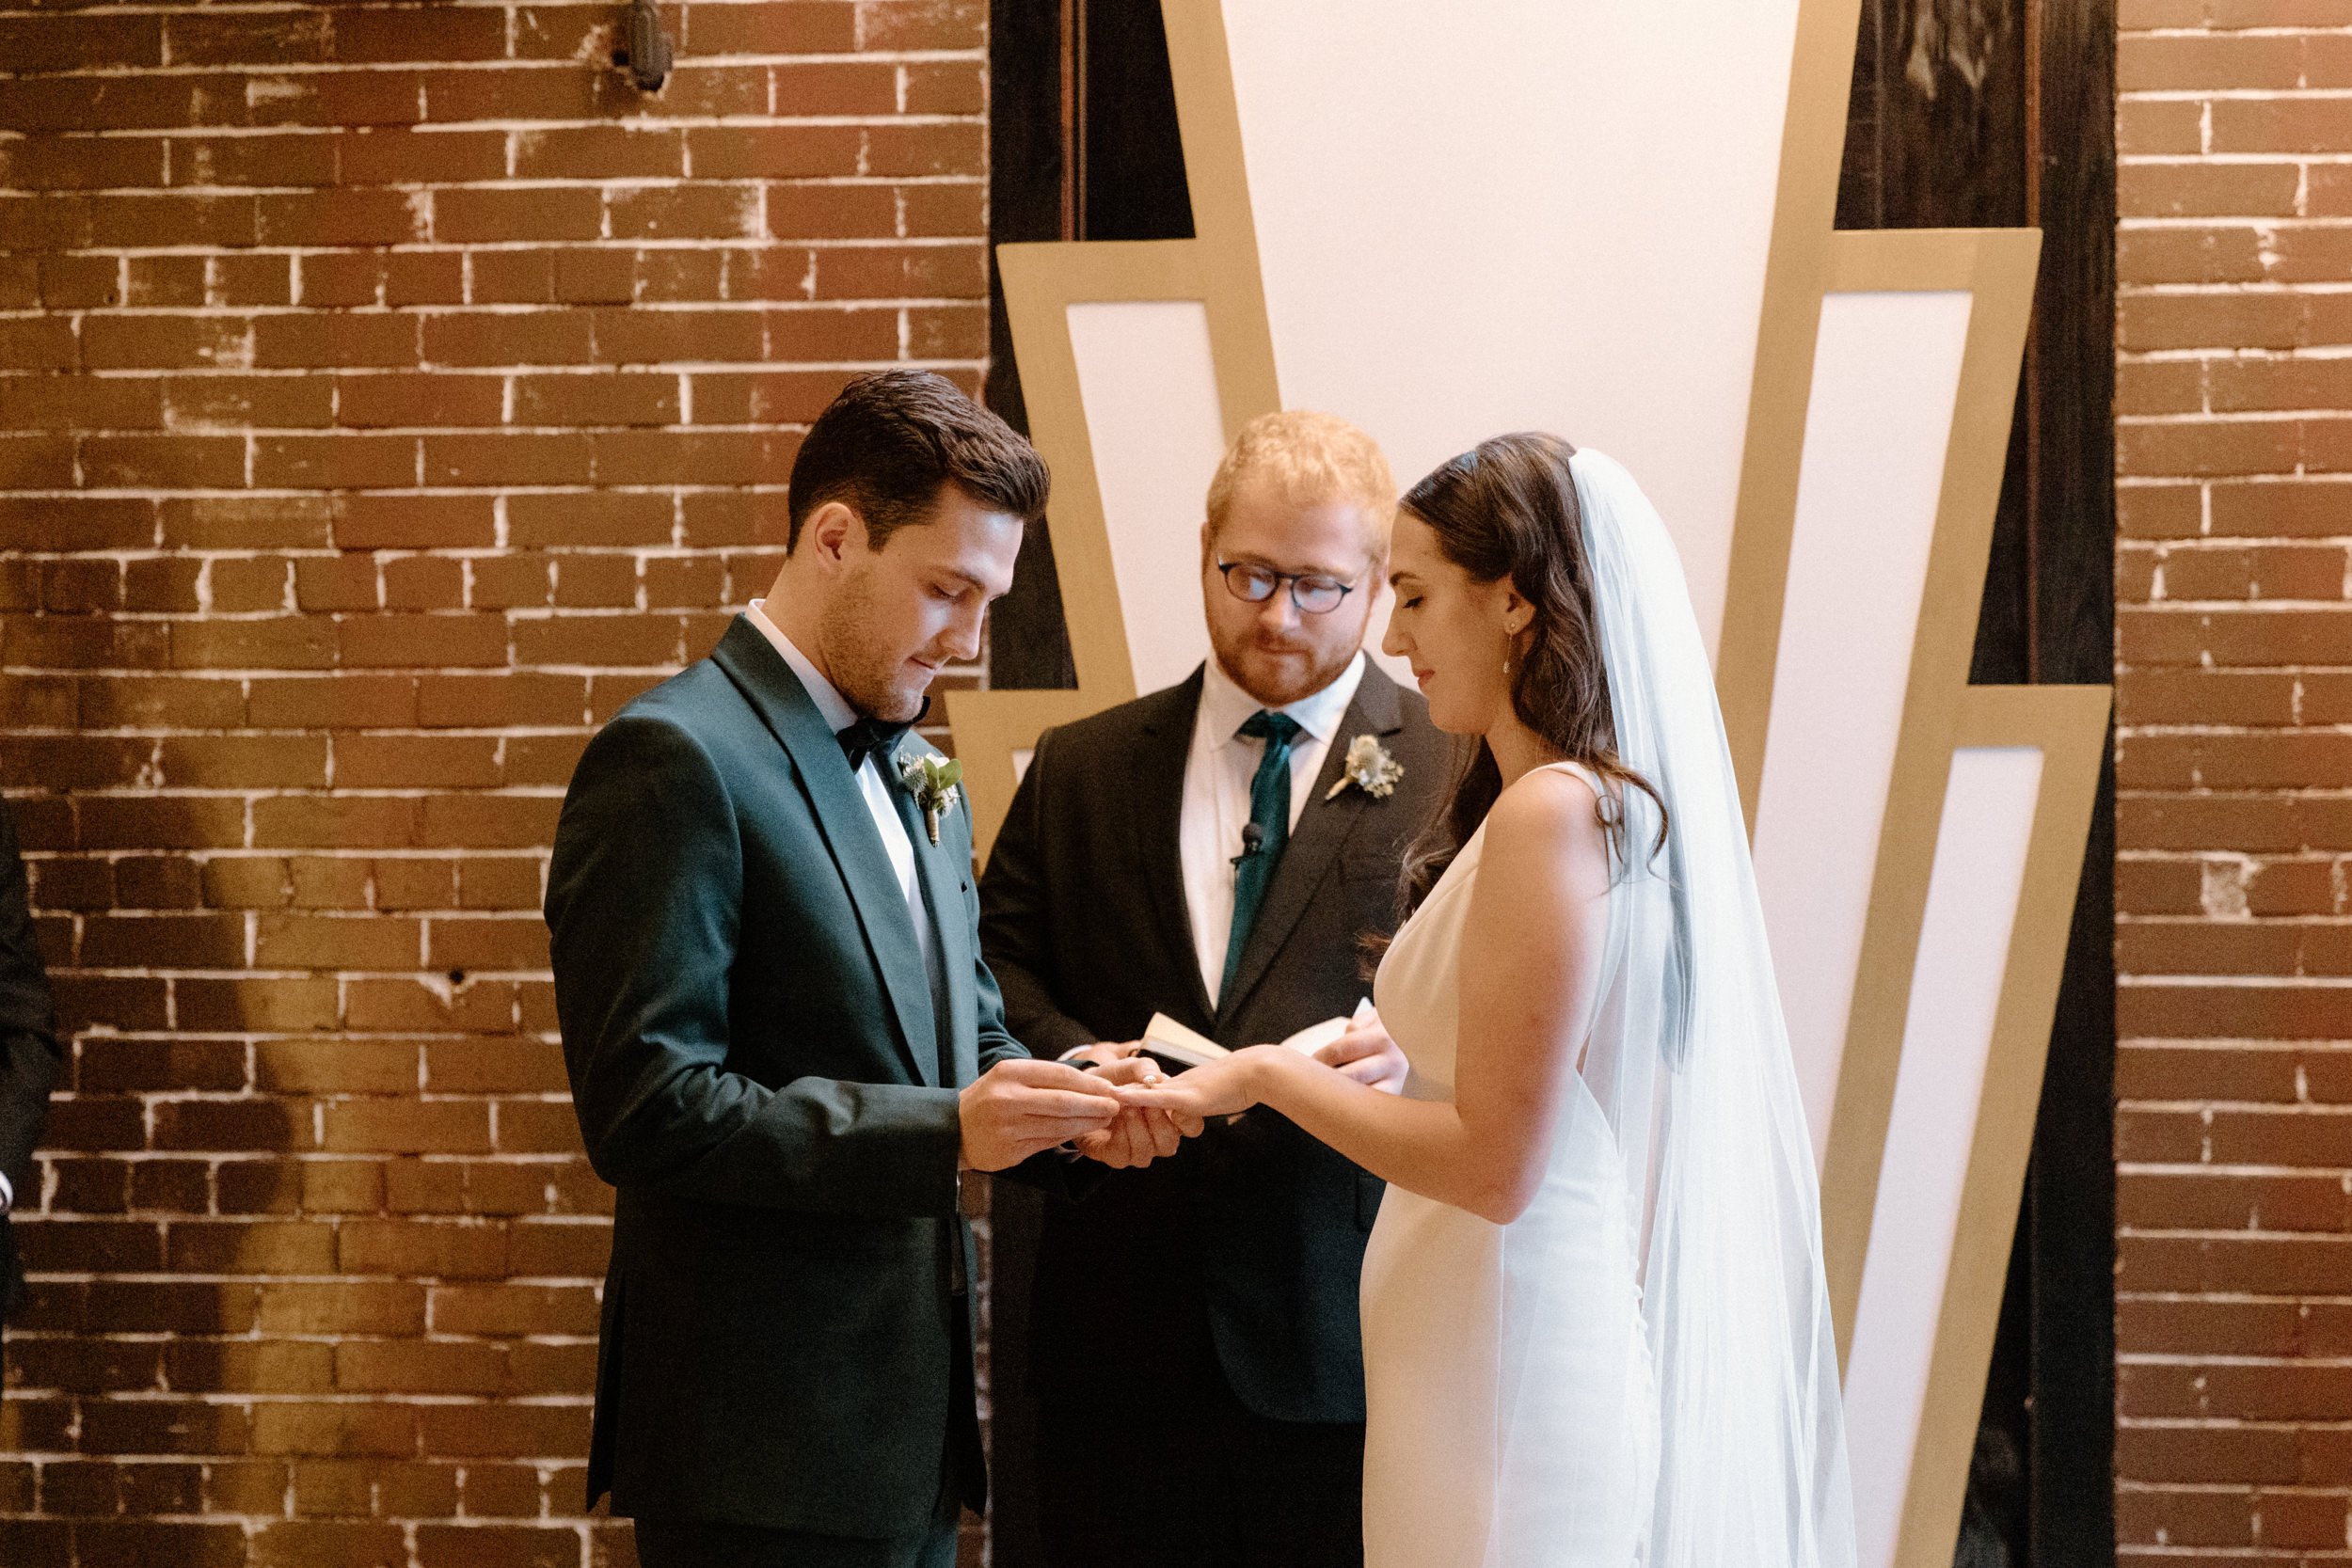 The groom places the ring on the bride's finger